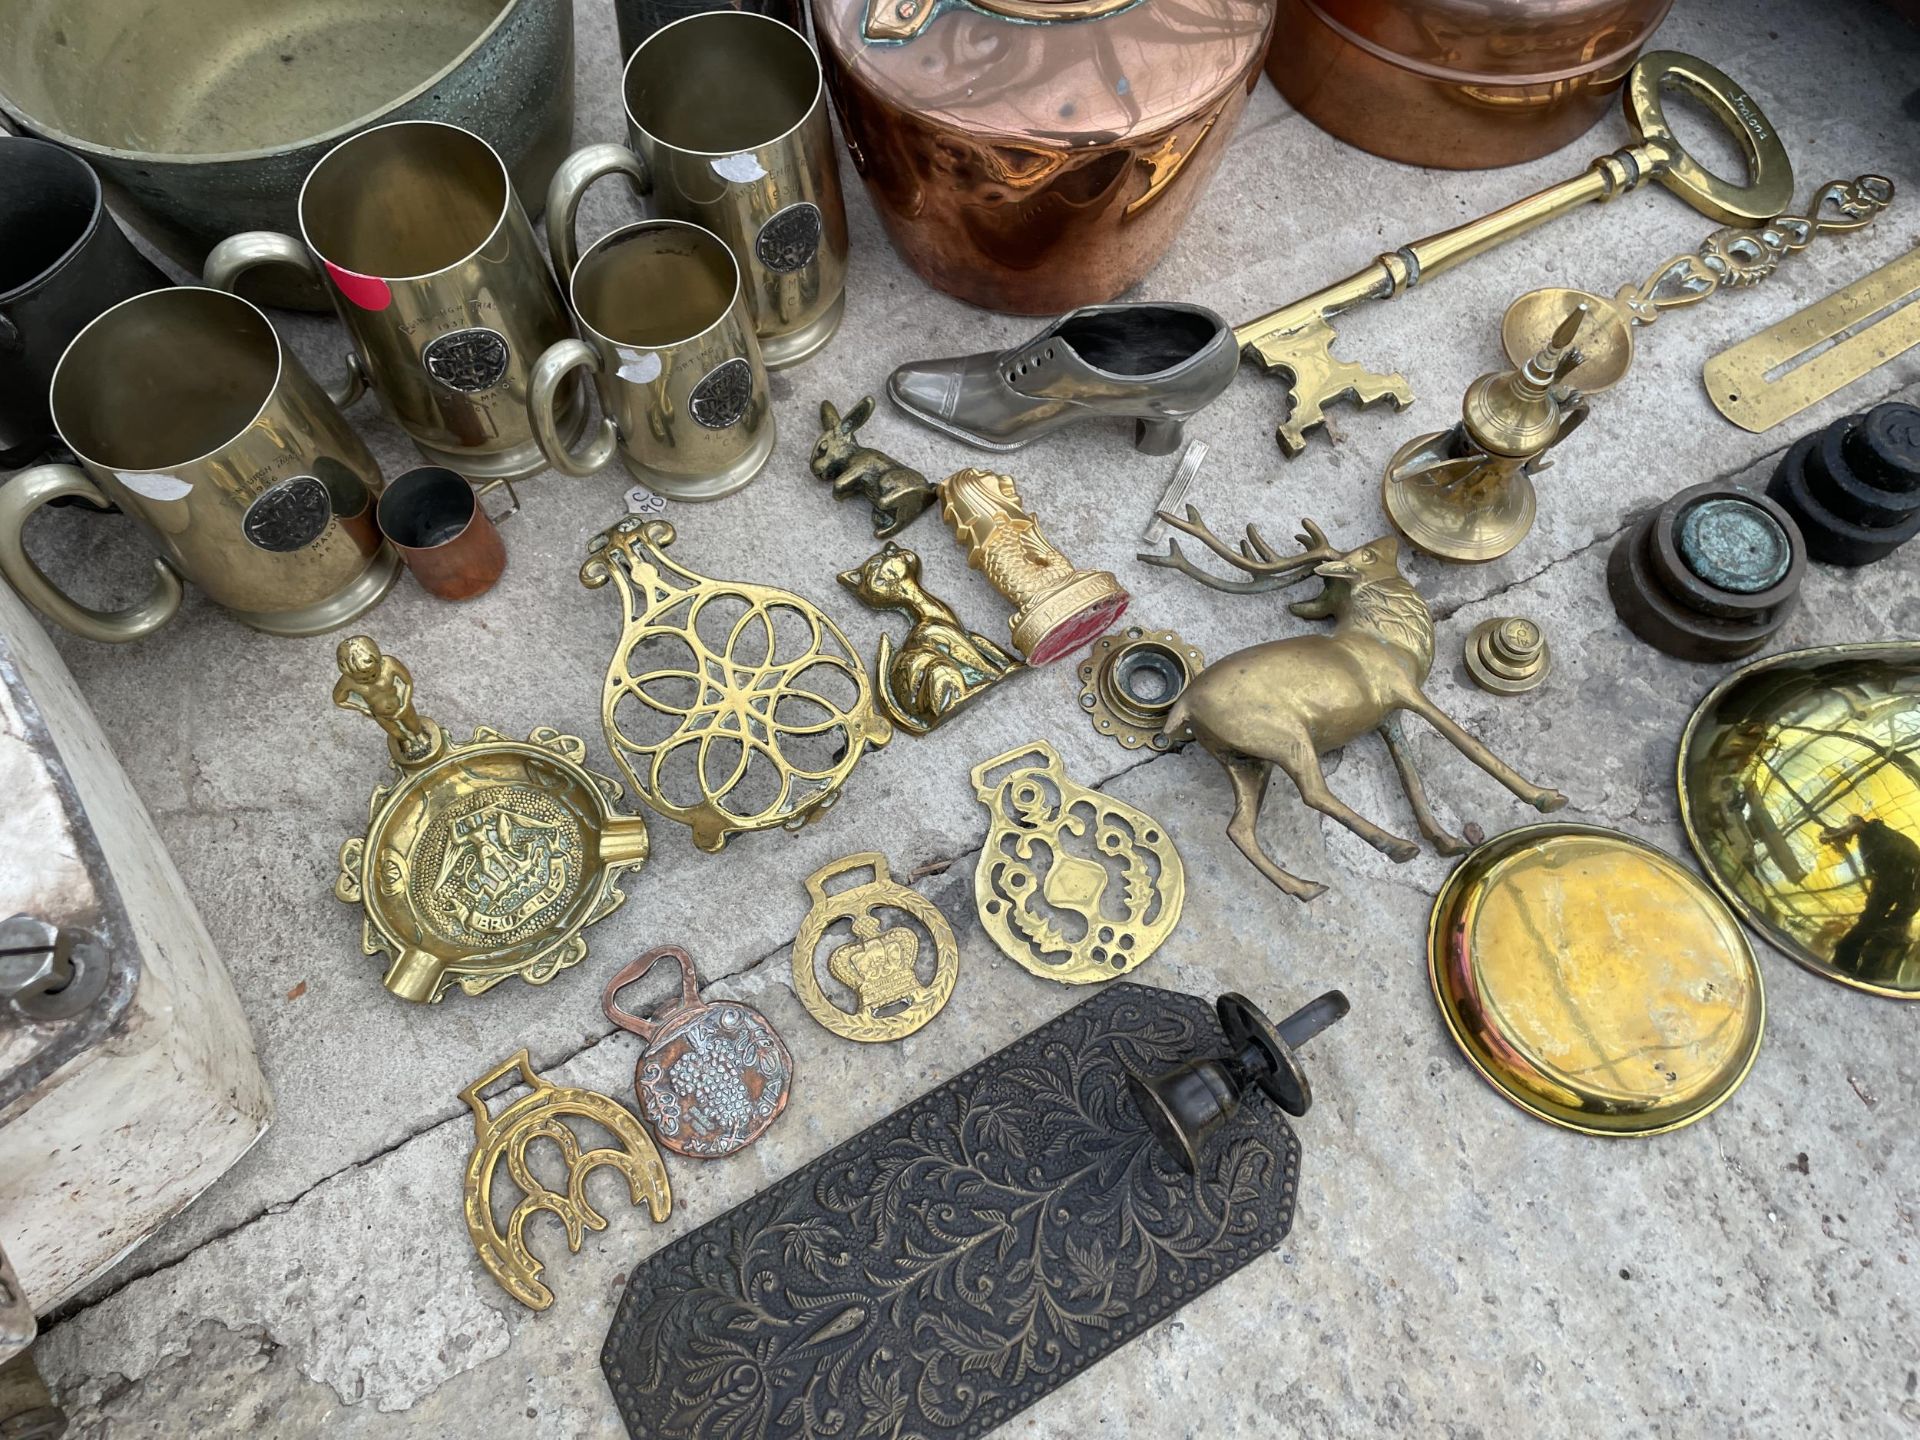 A LARGE ASSORTMENT OF METAL WARE ITEMS TO INCLUDE A LARGE BRASS KEY, COPPER KETTLES AND JAM PANS ETC - Image 2 of 4